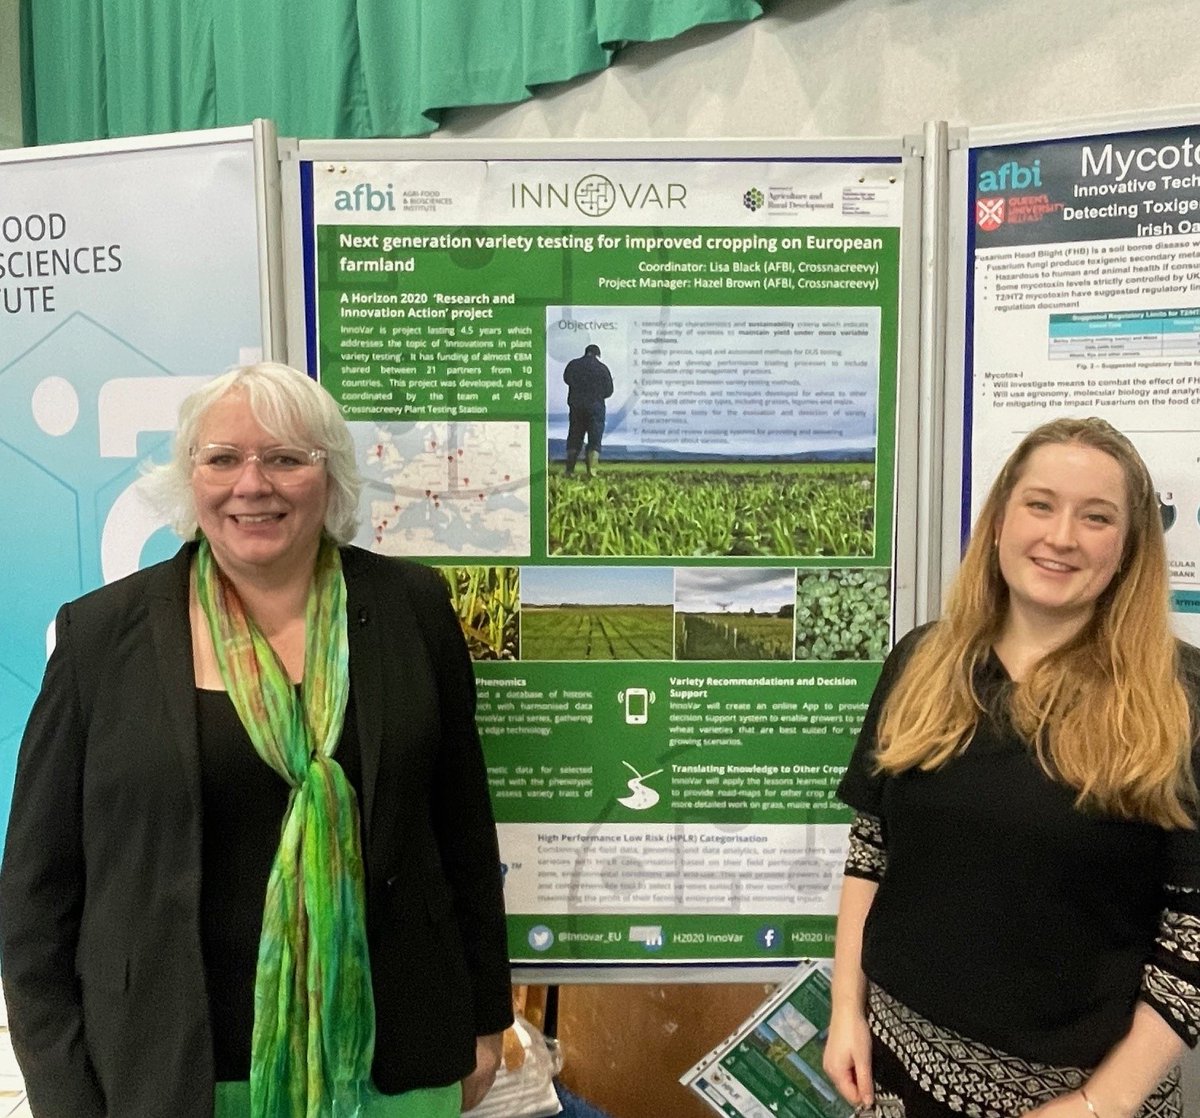 Last week's @UlsterArable @UFUHQ conference was a great oppertunity to gather feedback from farmers on the @InnoVar_EU project. Project manager Hazel Brown and Coordinator @LisaClareBlack presented the project poster. More info on the website: h2020innovar.eu